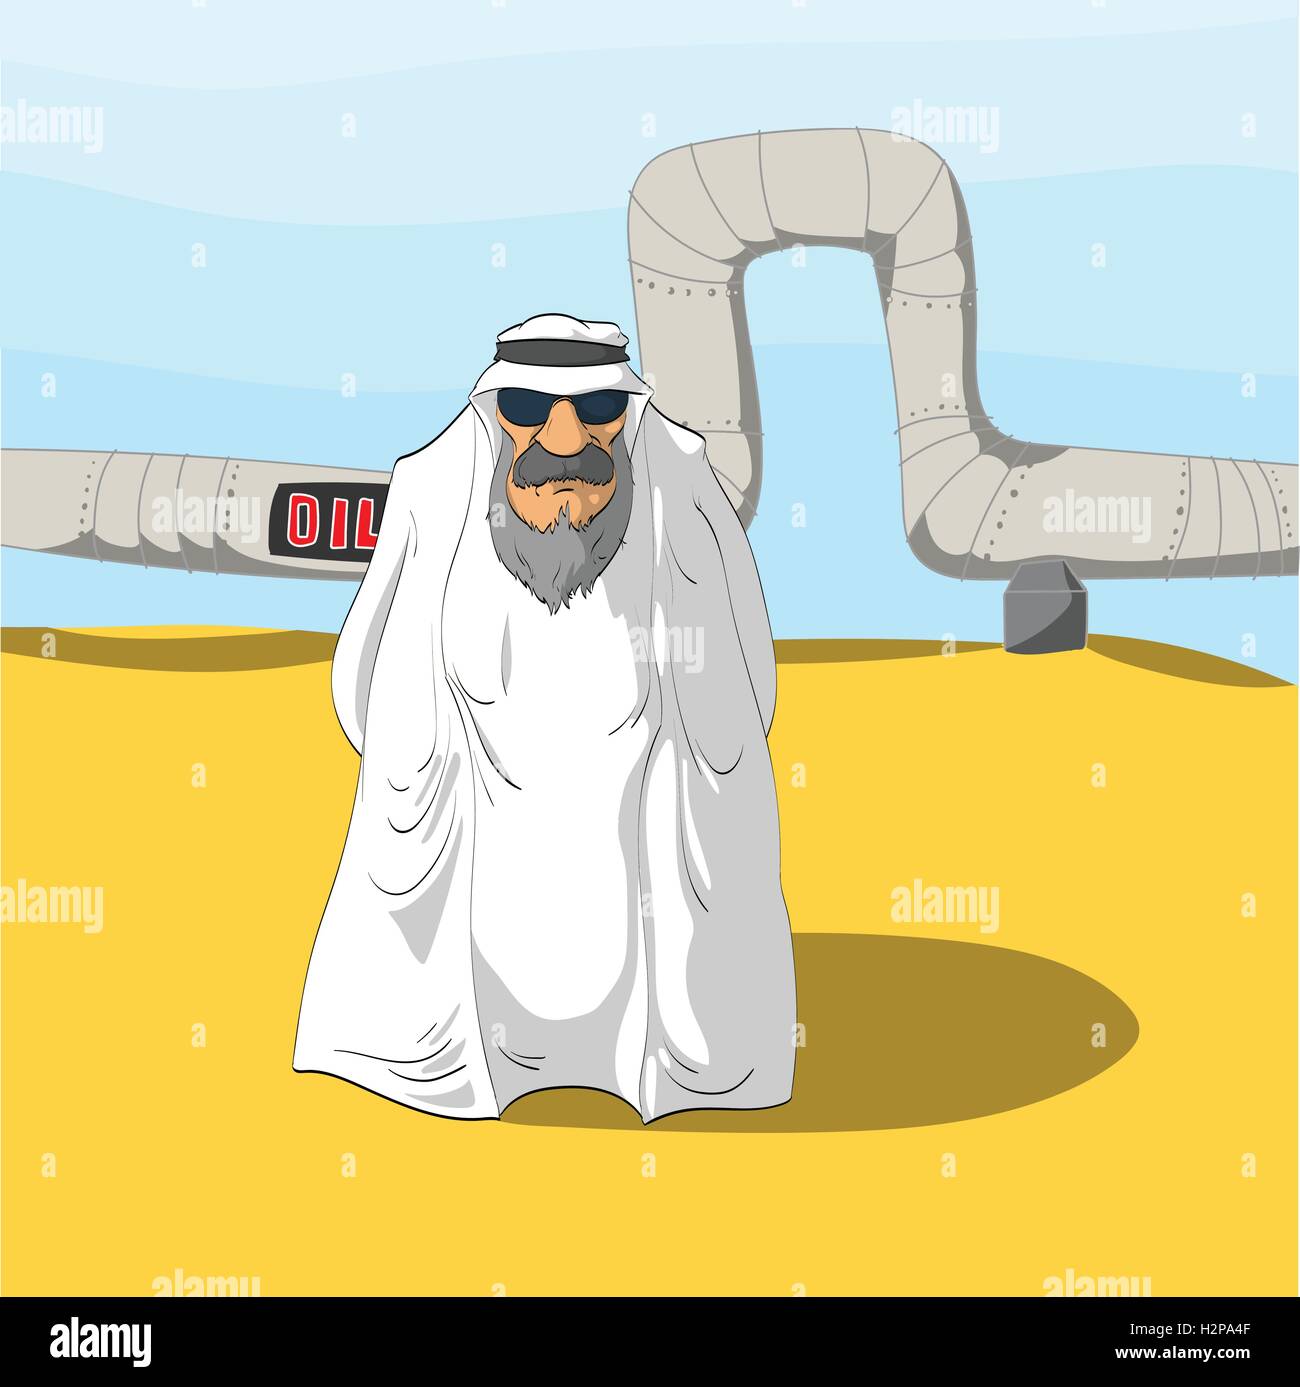 Cartoon illustration of an Arab Sheikh and an Oil Pipeline behind him, in the desert. Stock Vector